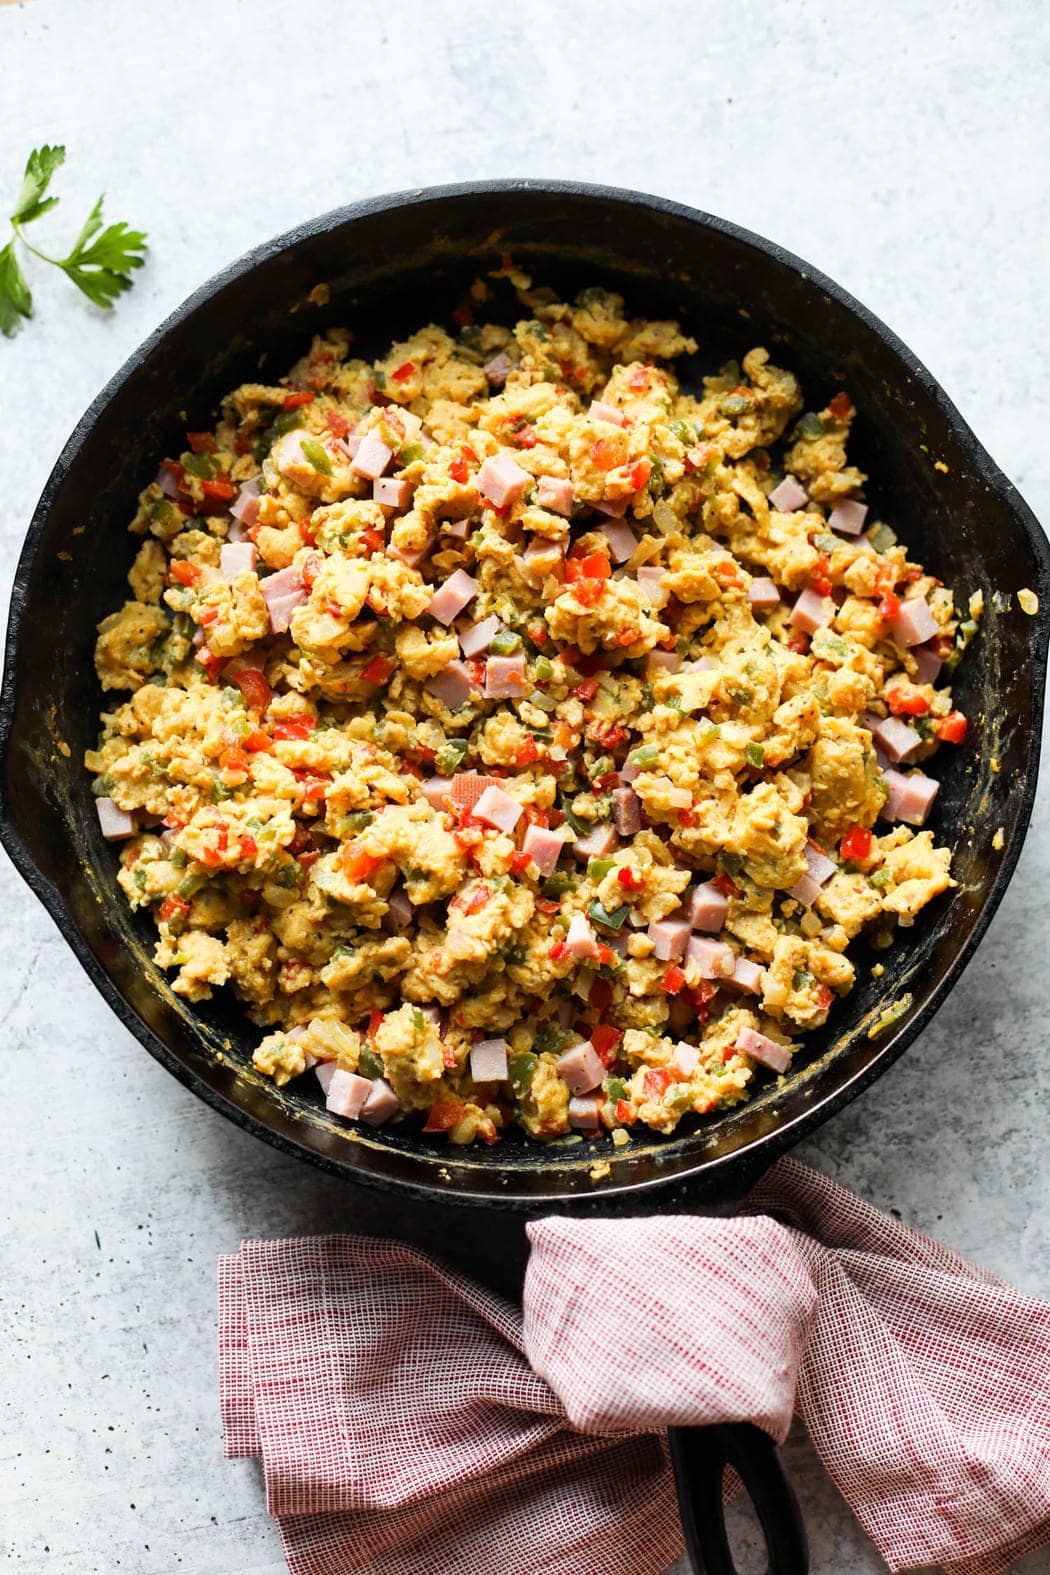 The scrambled egg and ham mixture for freezer burritos in a cast iron skillet